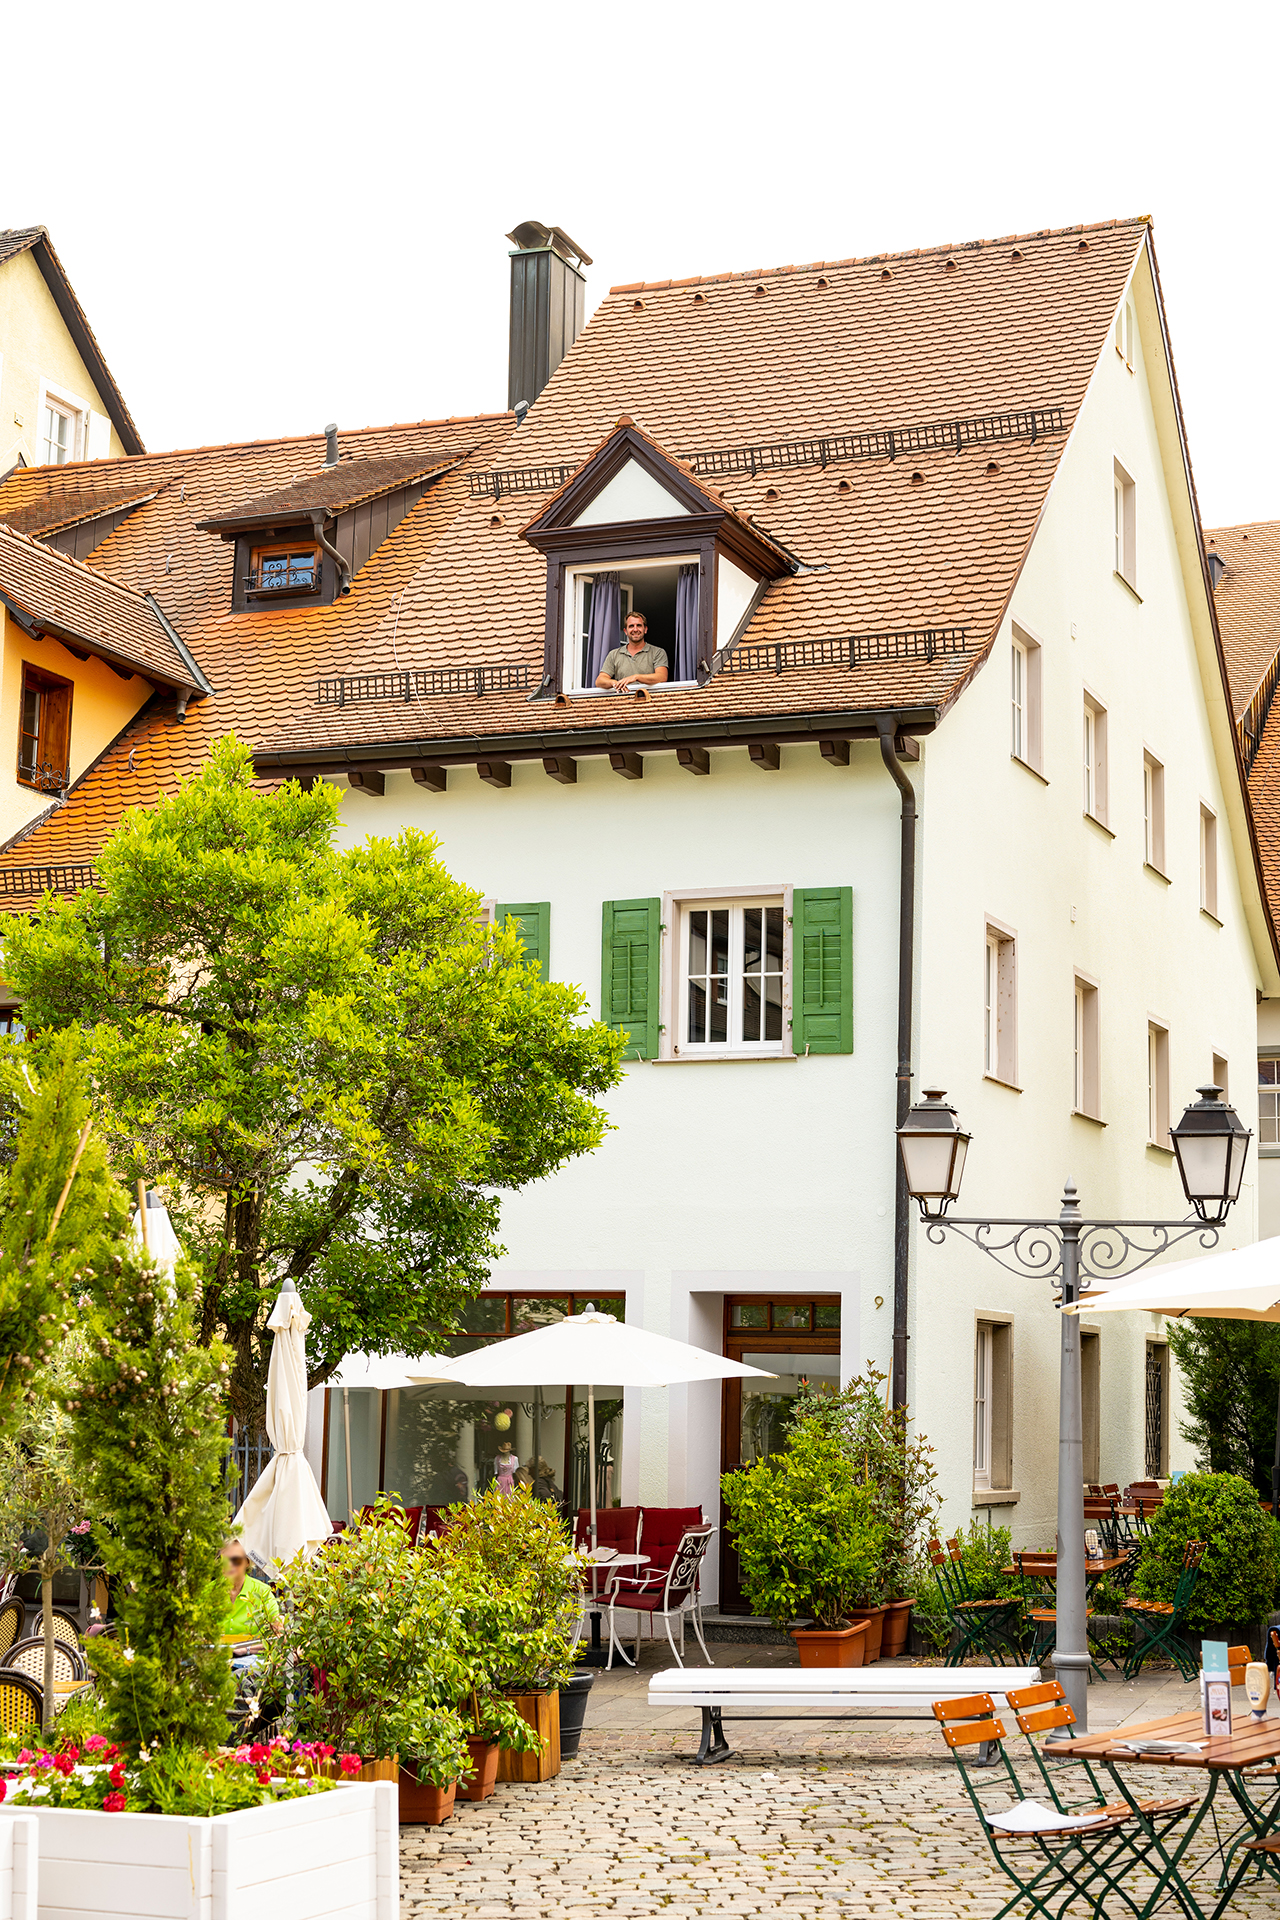 Holiday apartments on Lake Constance: Guest House "Am Schlossplatz", Room #4 - Exterior